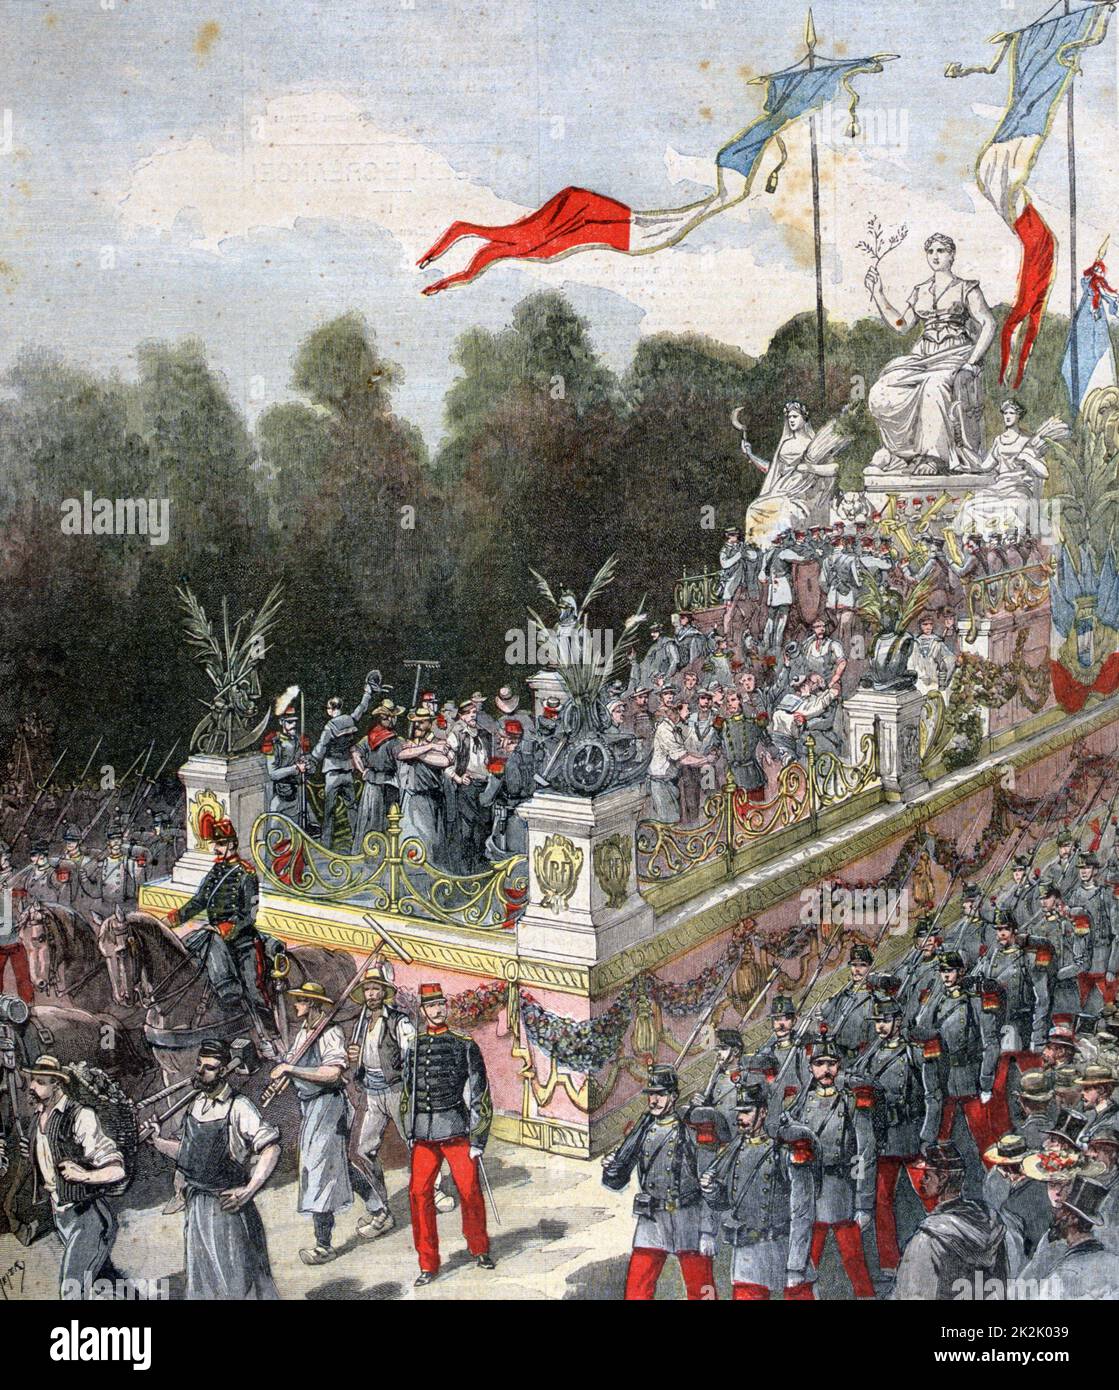 National Festival celebrating the centenary of the proclamation of the French Republic. Float of Concord and Peace in parade through Paris on 22 September. From 'Le Petit Journal, Paris, 24 September 1892. France, Nationalism Stock Photo